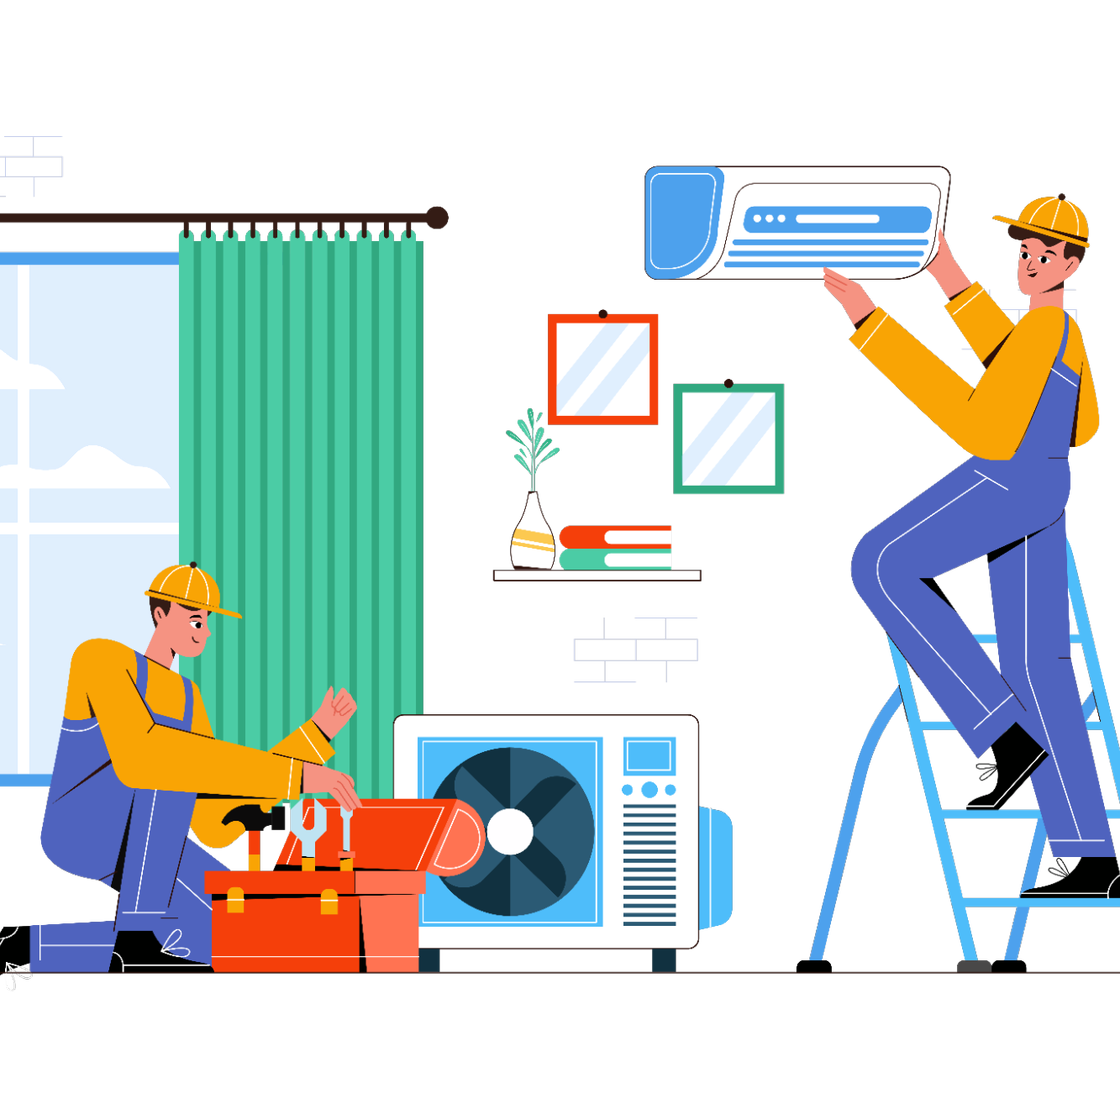 Animated graphic of two technicians in the living room of a home that has green curtains over an open window showing a cloudy blue sky while the techs are working on a ductless ac unit.